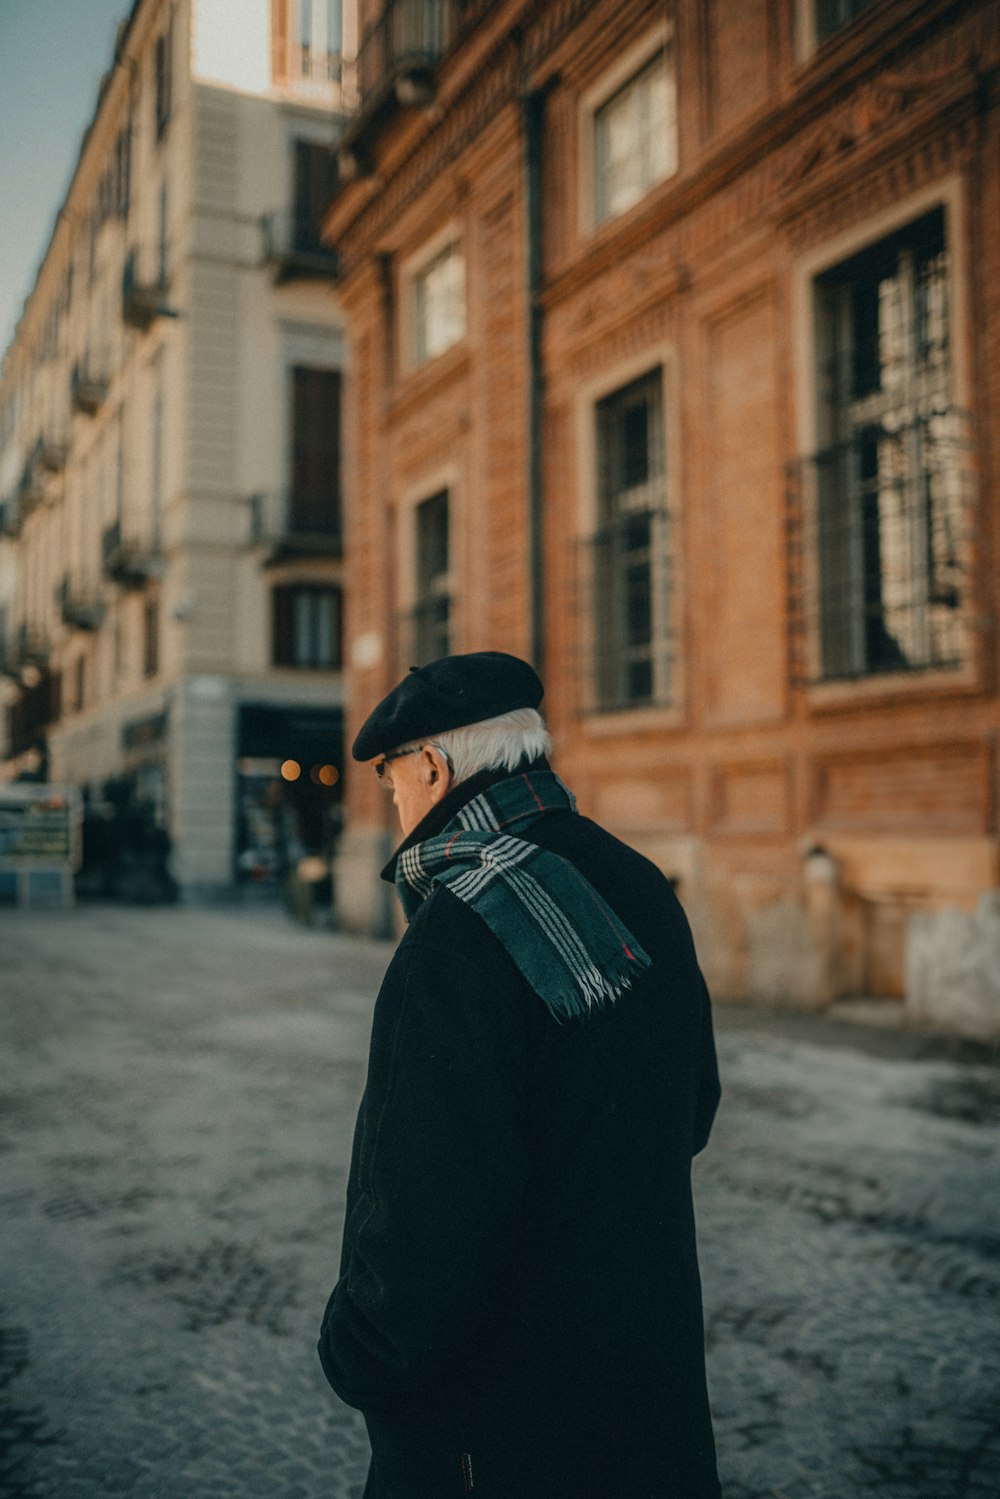 a man in a black coat and hat walking down a street